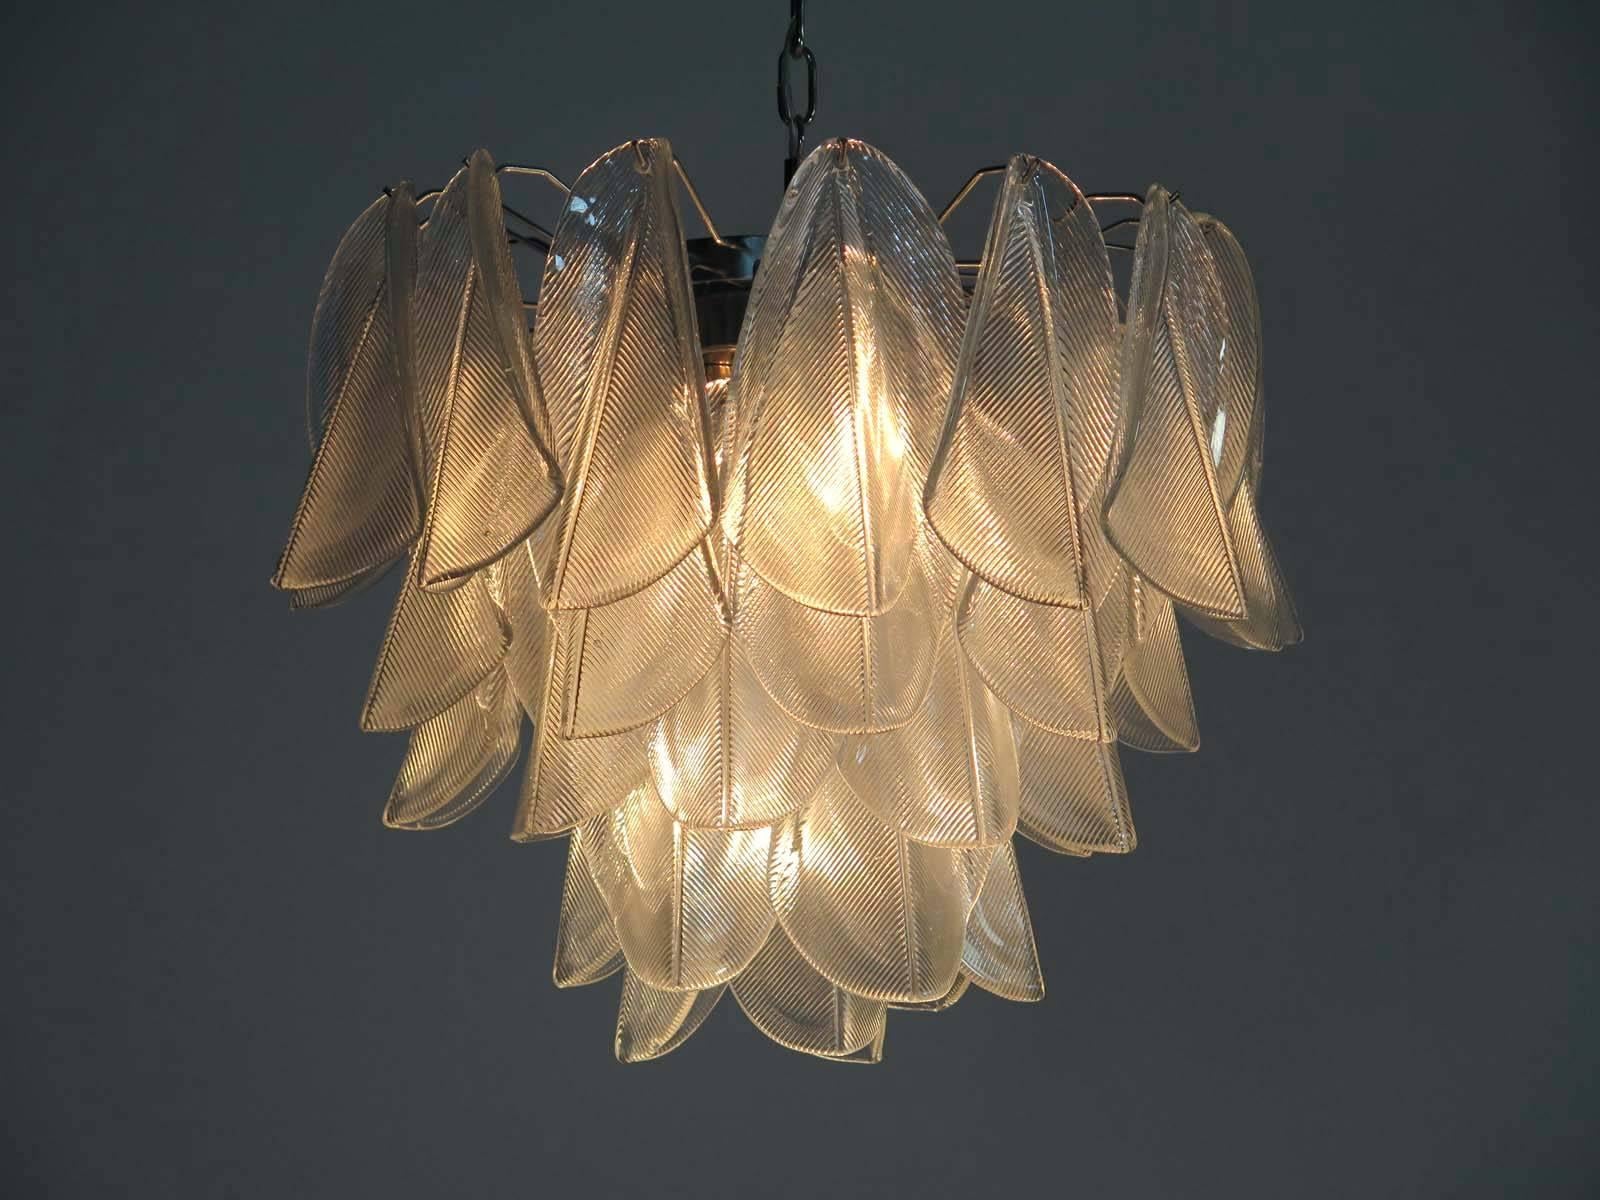 Rare Italian vintage Murano chandelier. The fixture is made up of 41 individual handblown transparent glass elements hanging from a chrome frame.
Dimensions: 49.20 inches (125 cm) height with chain; 21.65 inches (55 cm) height without chain; 25.20